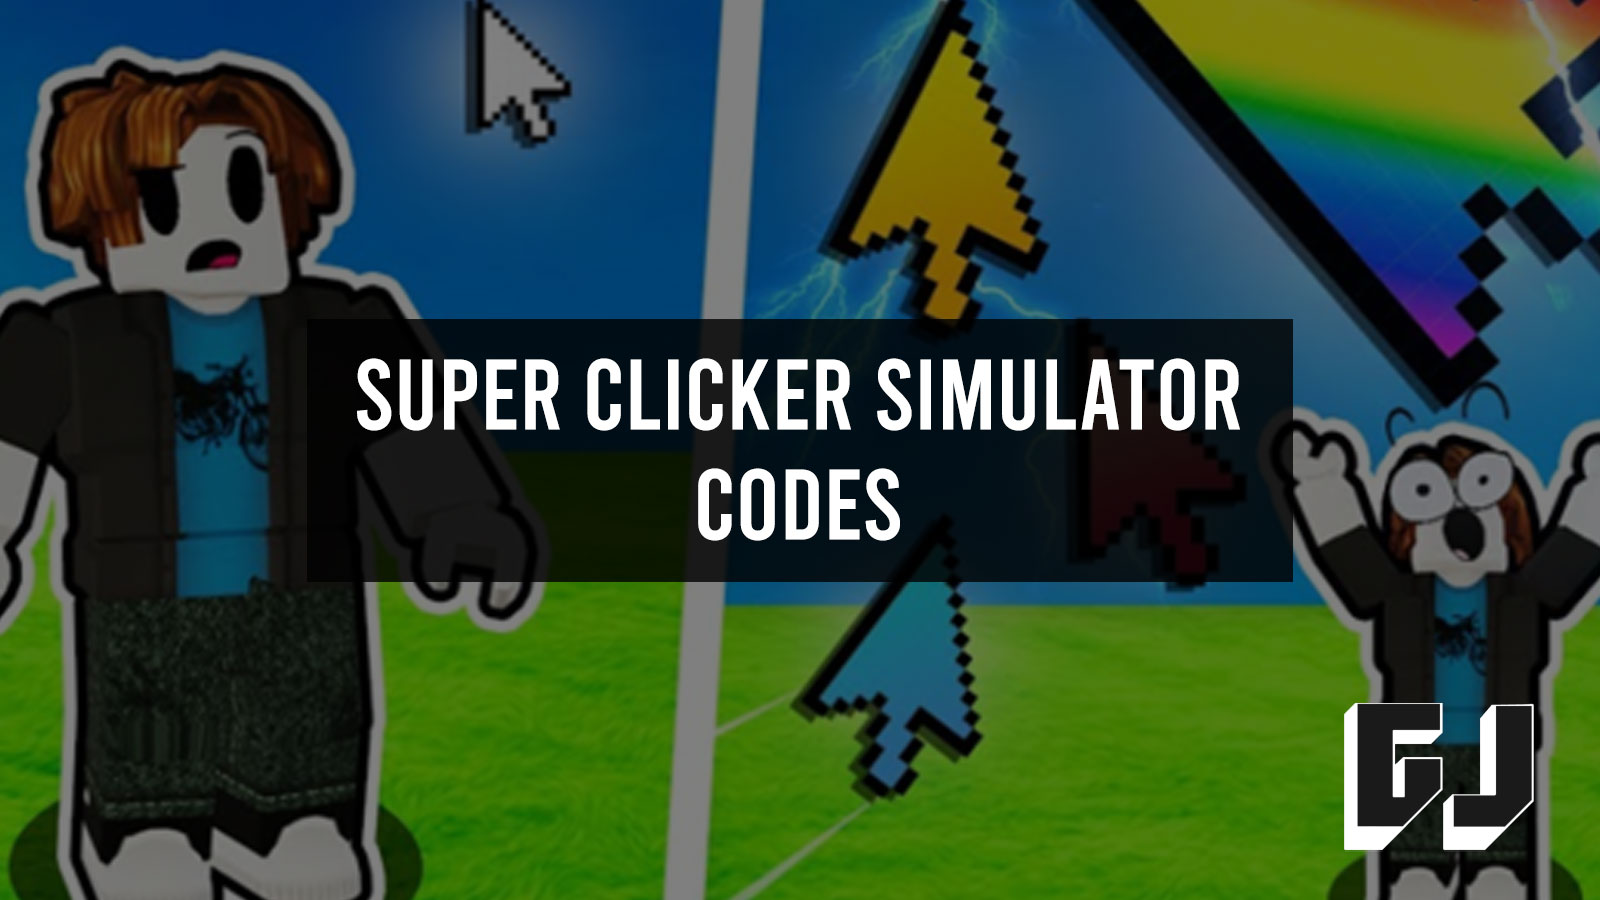 Super Clicker Simulator Codes - Try Hard Guides